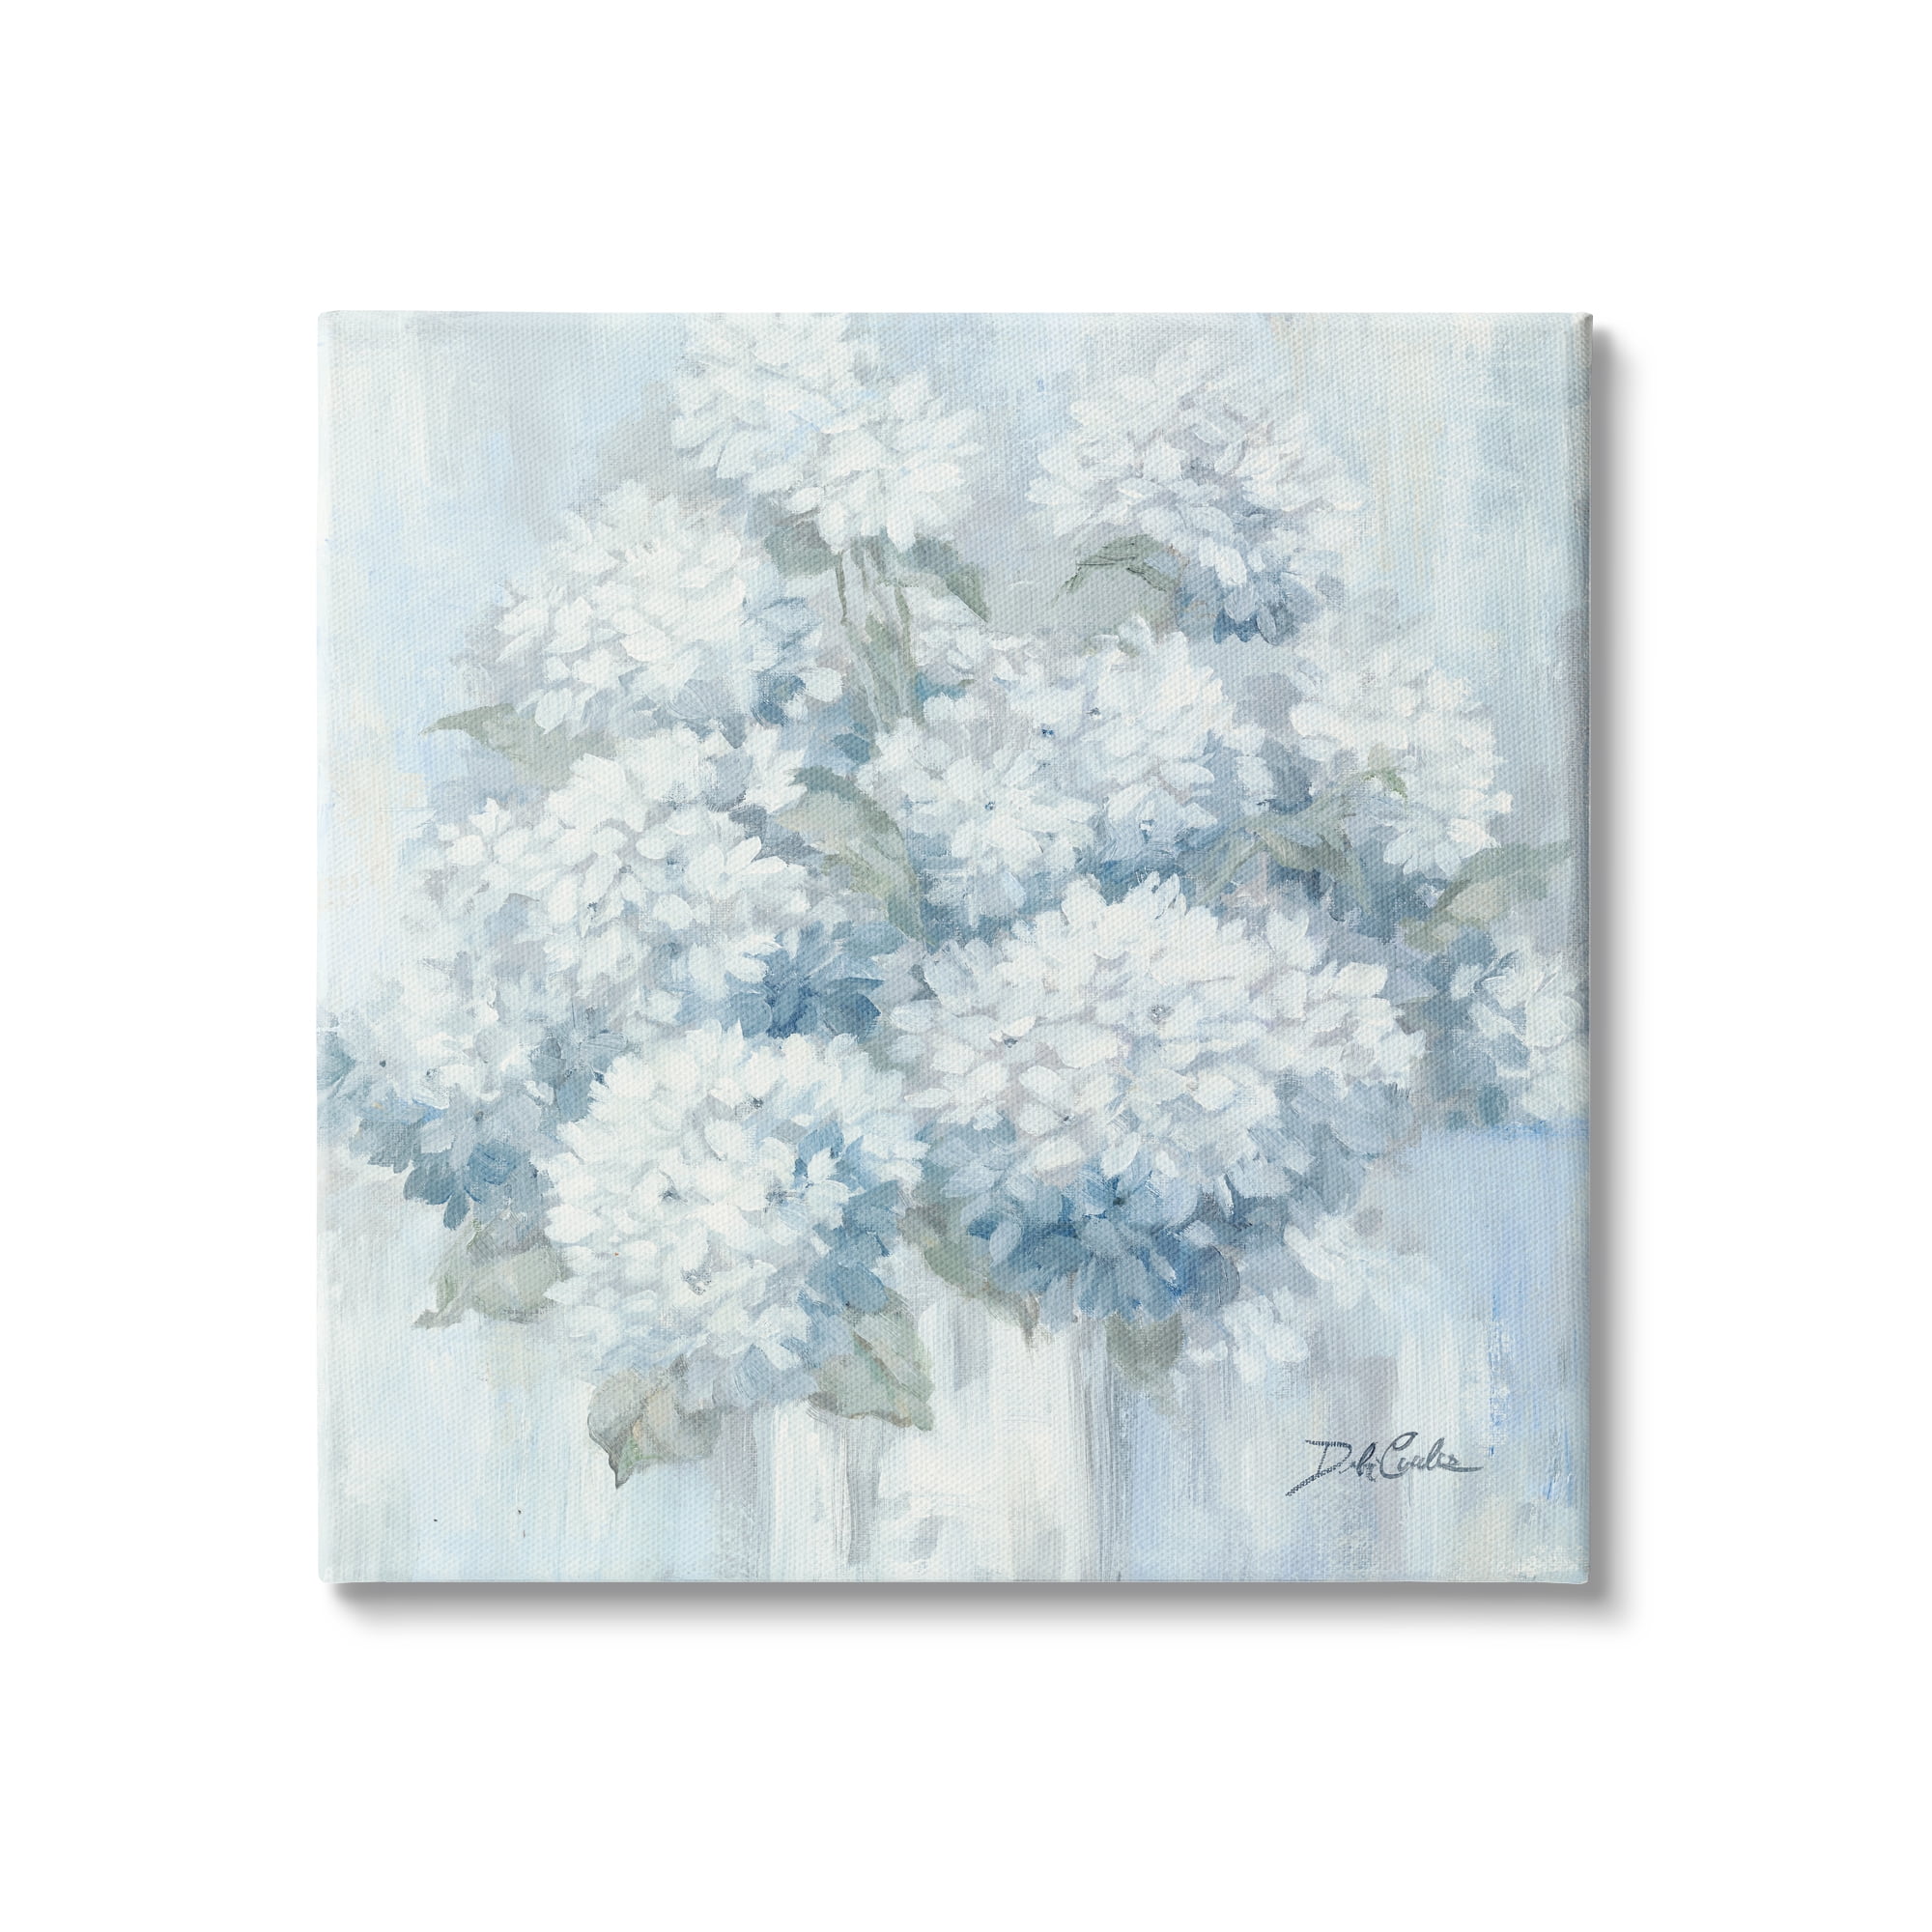 Blooming painting  on paper in floating frame Bedroom wall decor Floral wall art Blue hydrangea painting